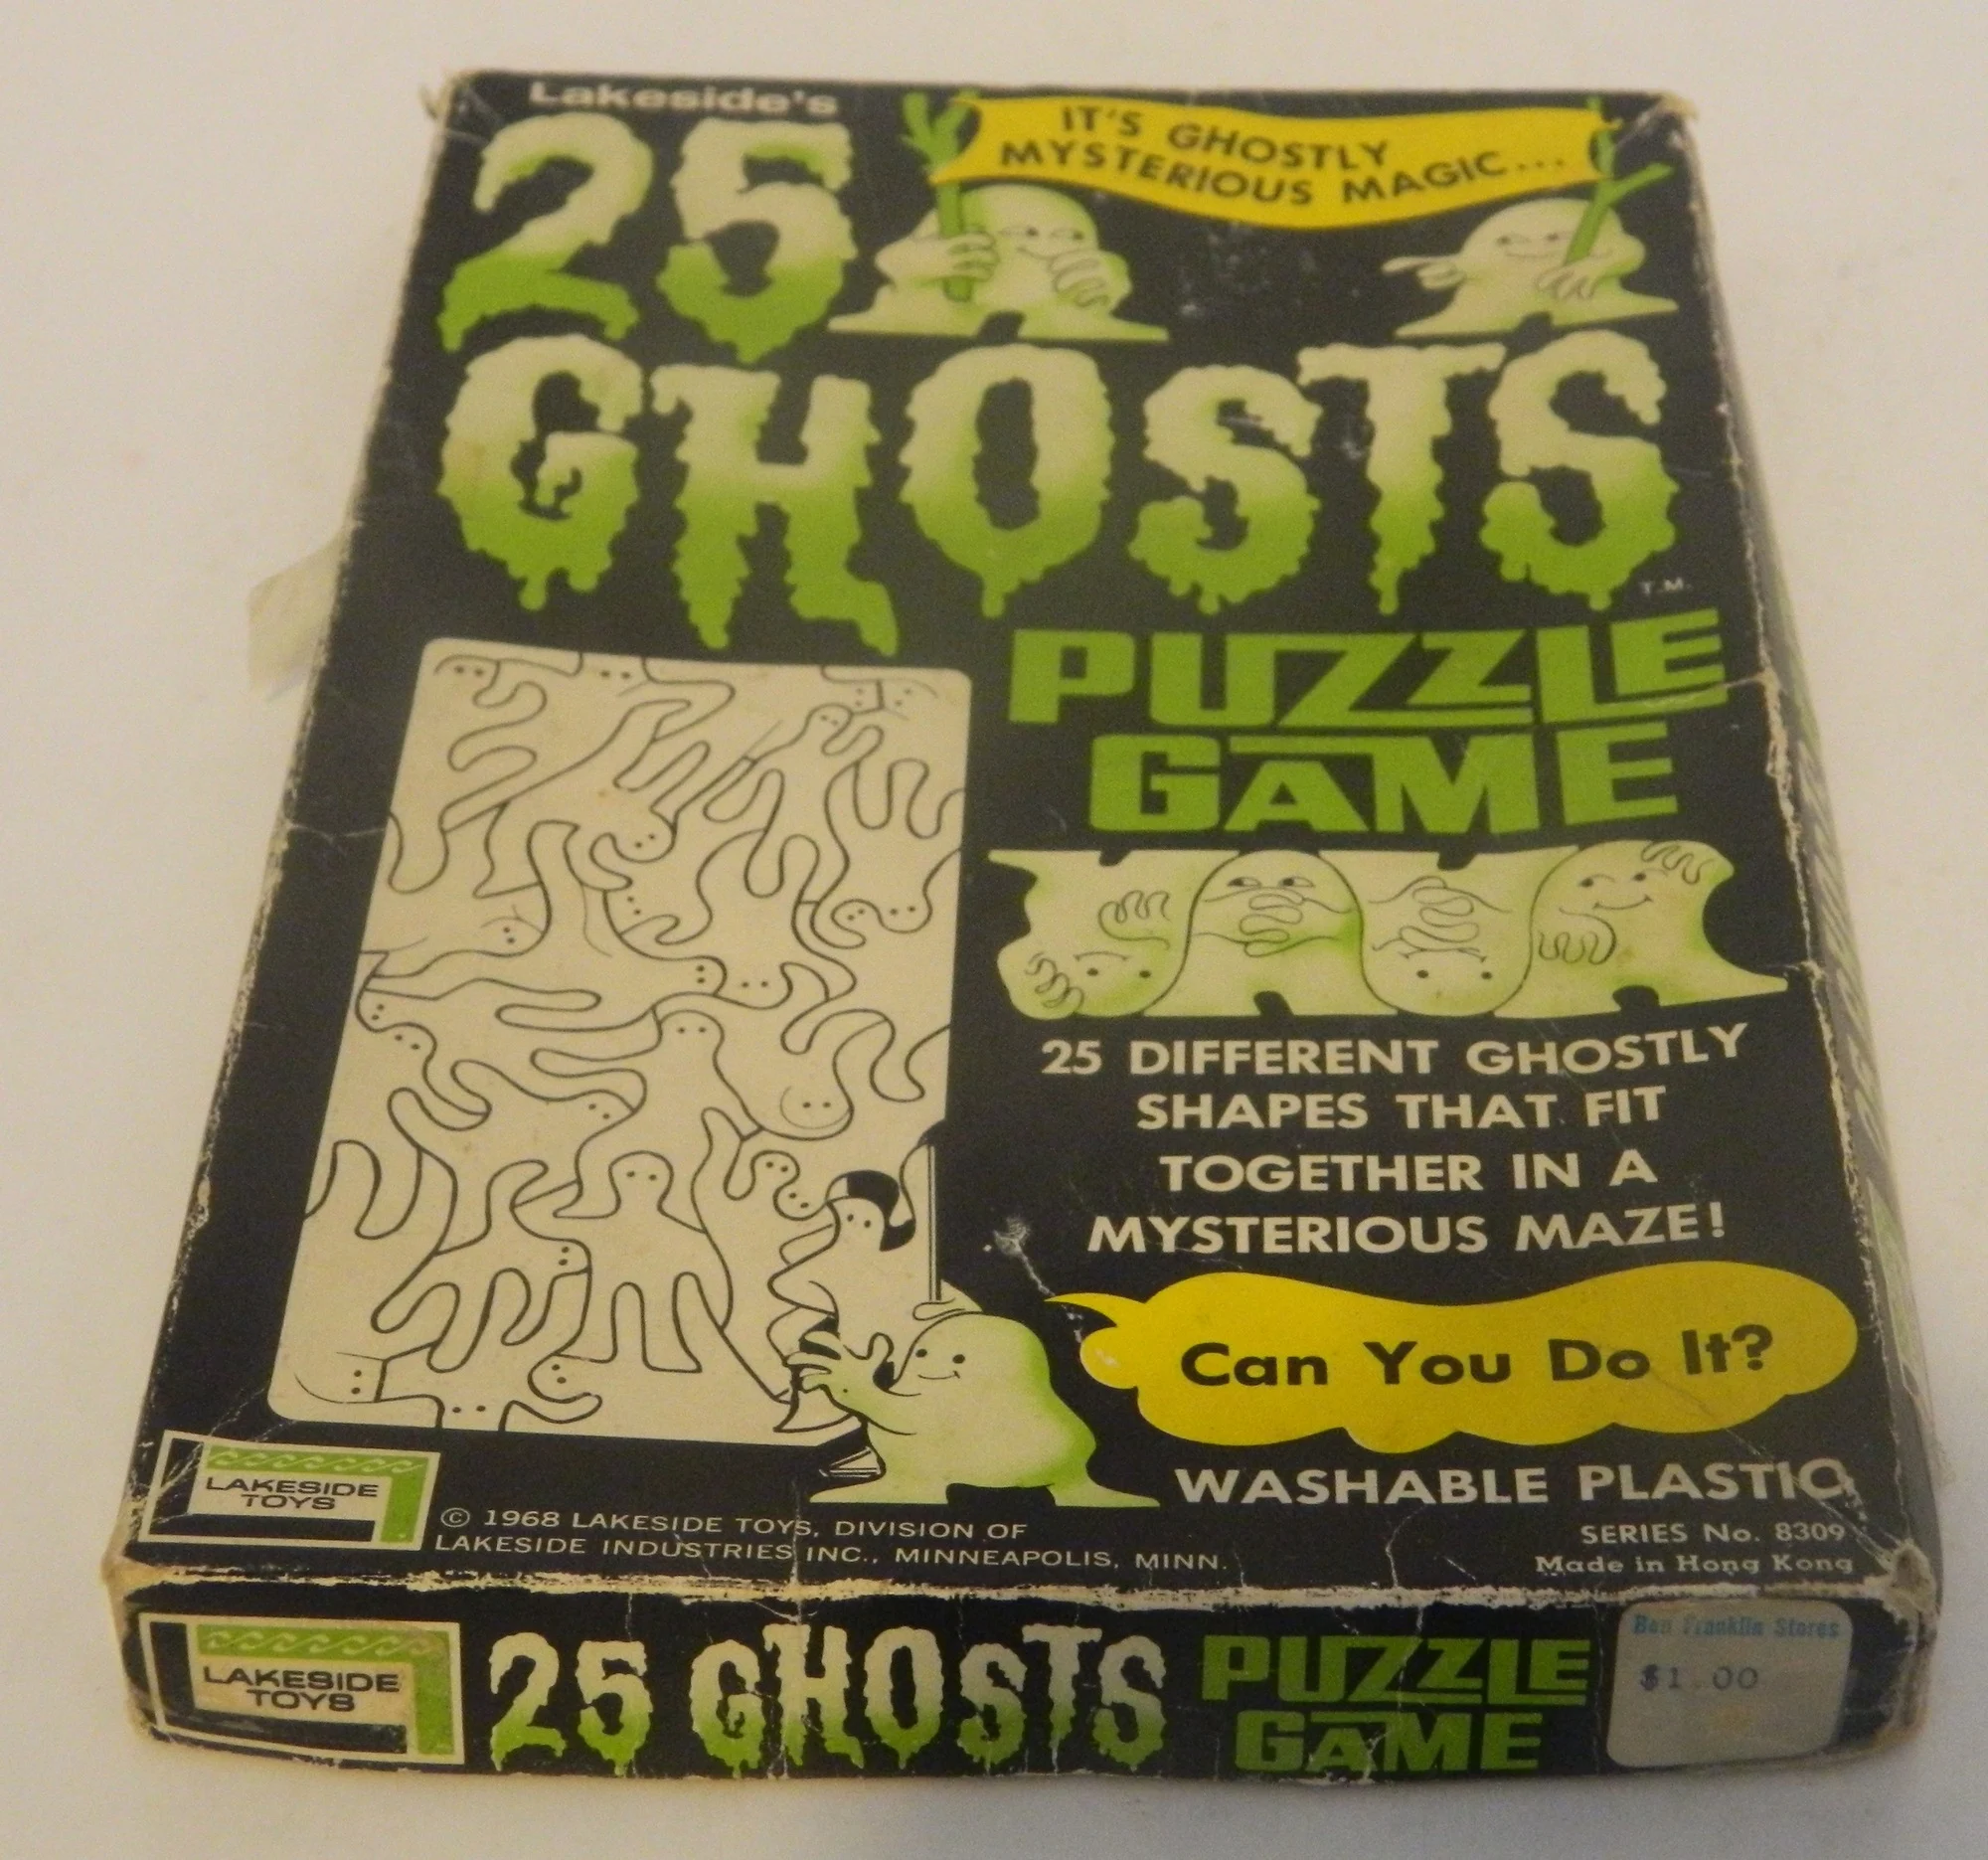 Box for 25 Ghosts Puzzle Game